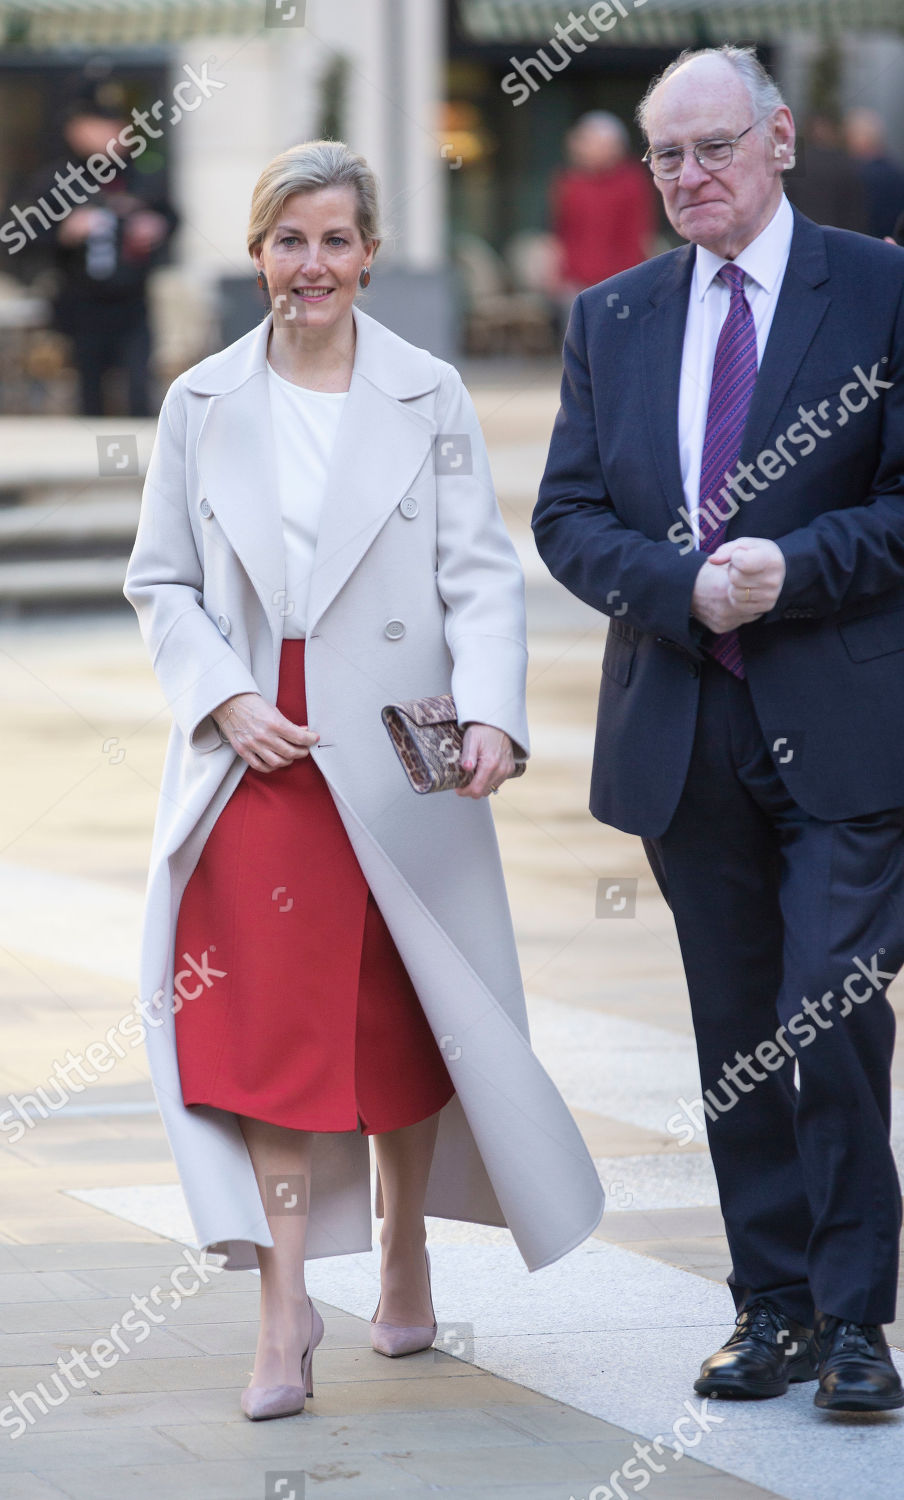 sophie-countess-of-wessex-attends-womens-network-forum-and-market-opening-ceremony-international-womens-day-london-uk-08-mar-2019-shutterstock-editorial-10147941l.jpg